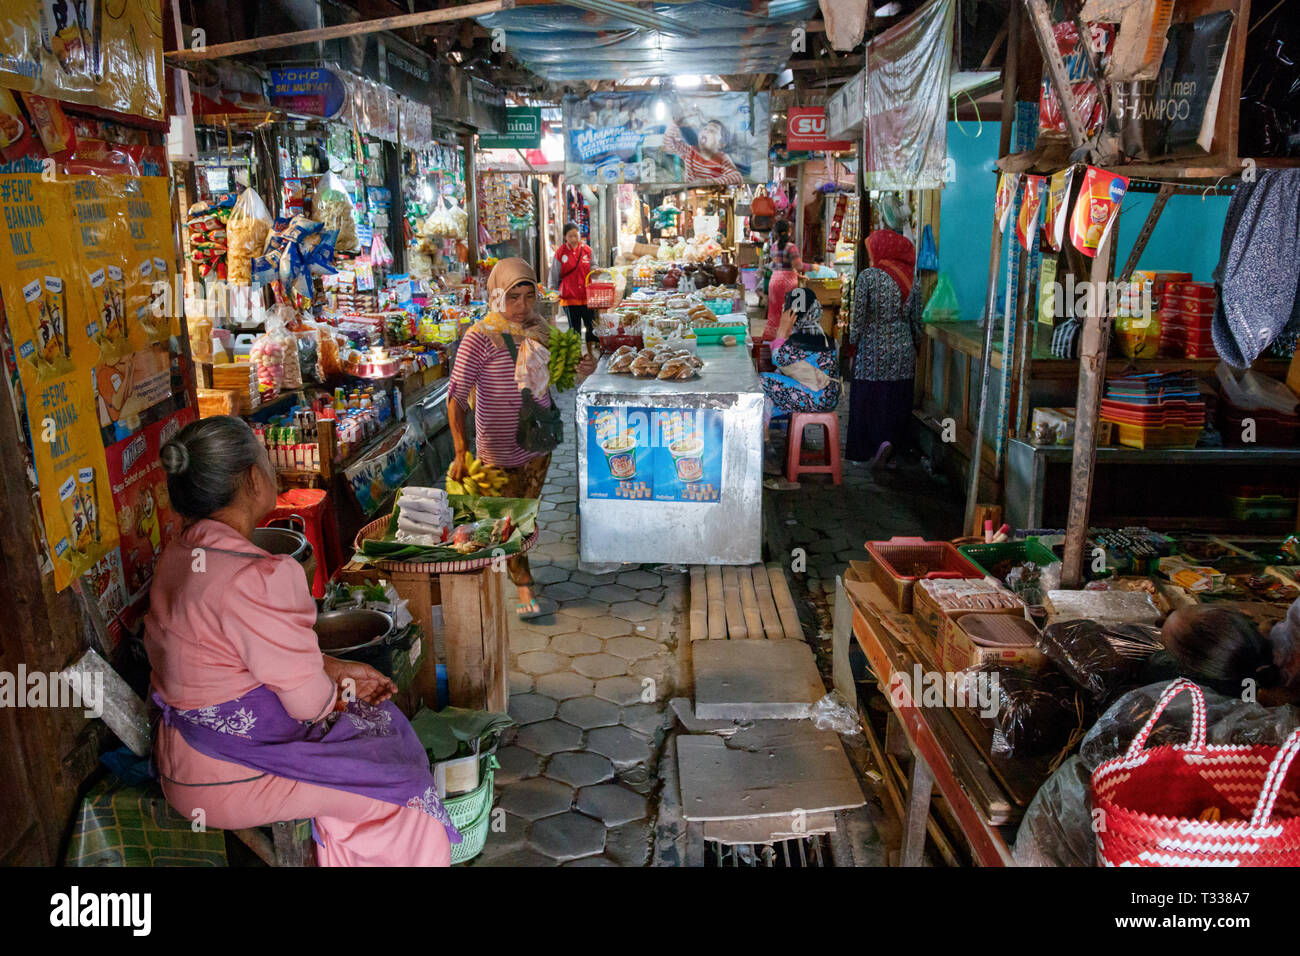 Undentified people in a local indoor market of Borobudur village with dark, small streets and numerous shops. Stock Photo